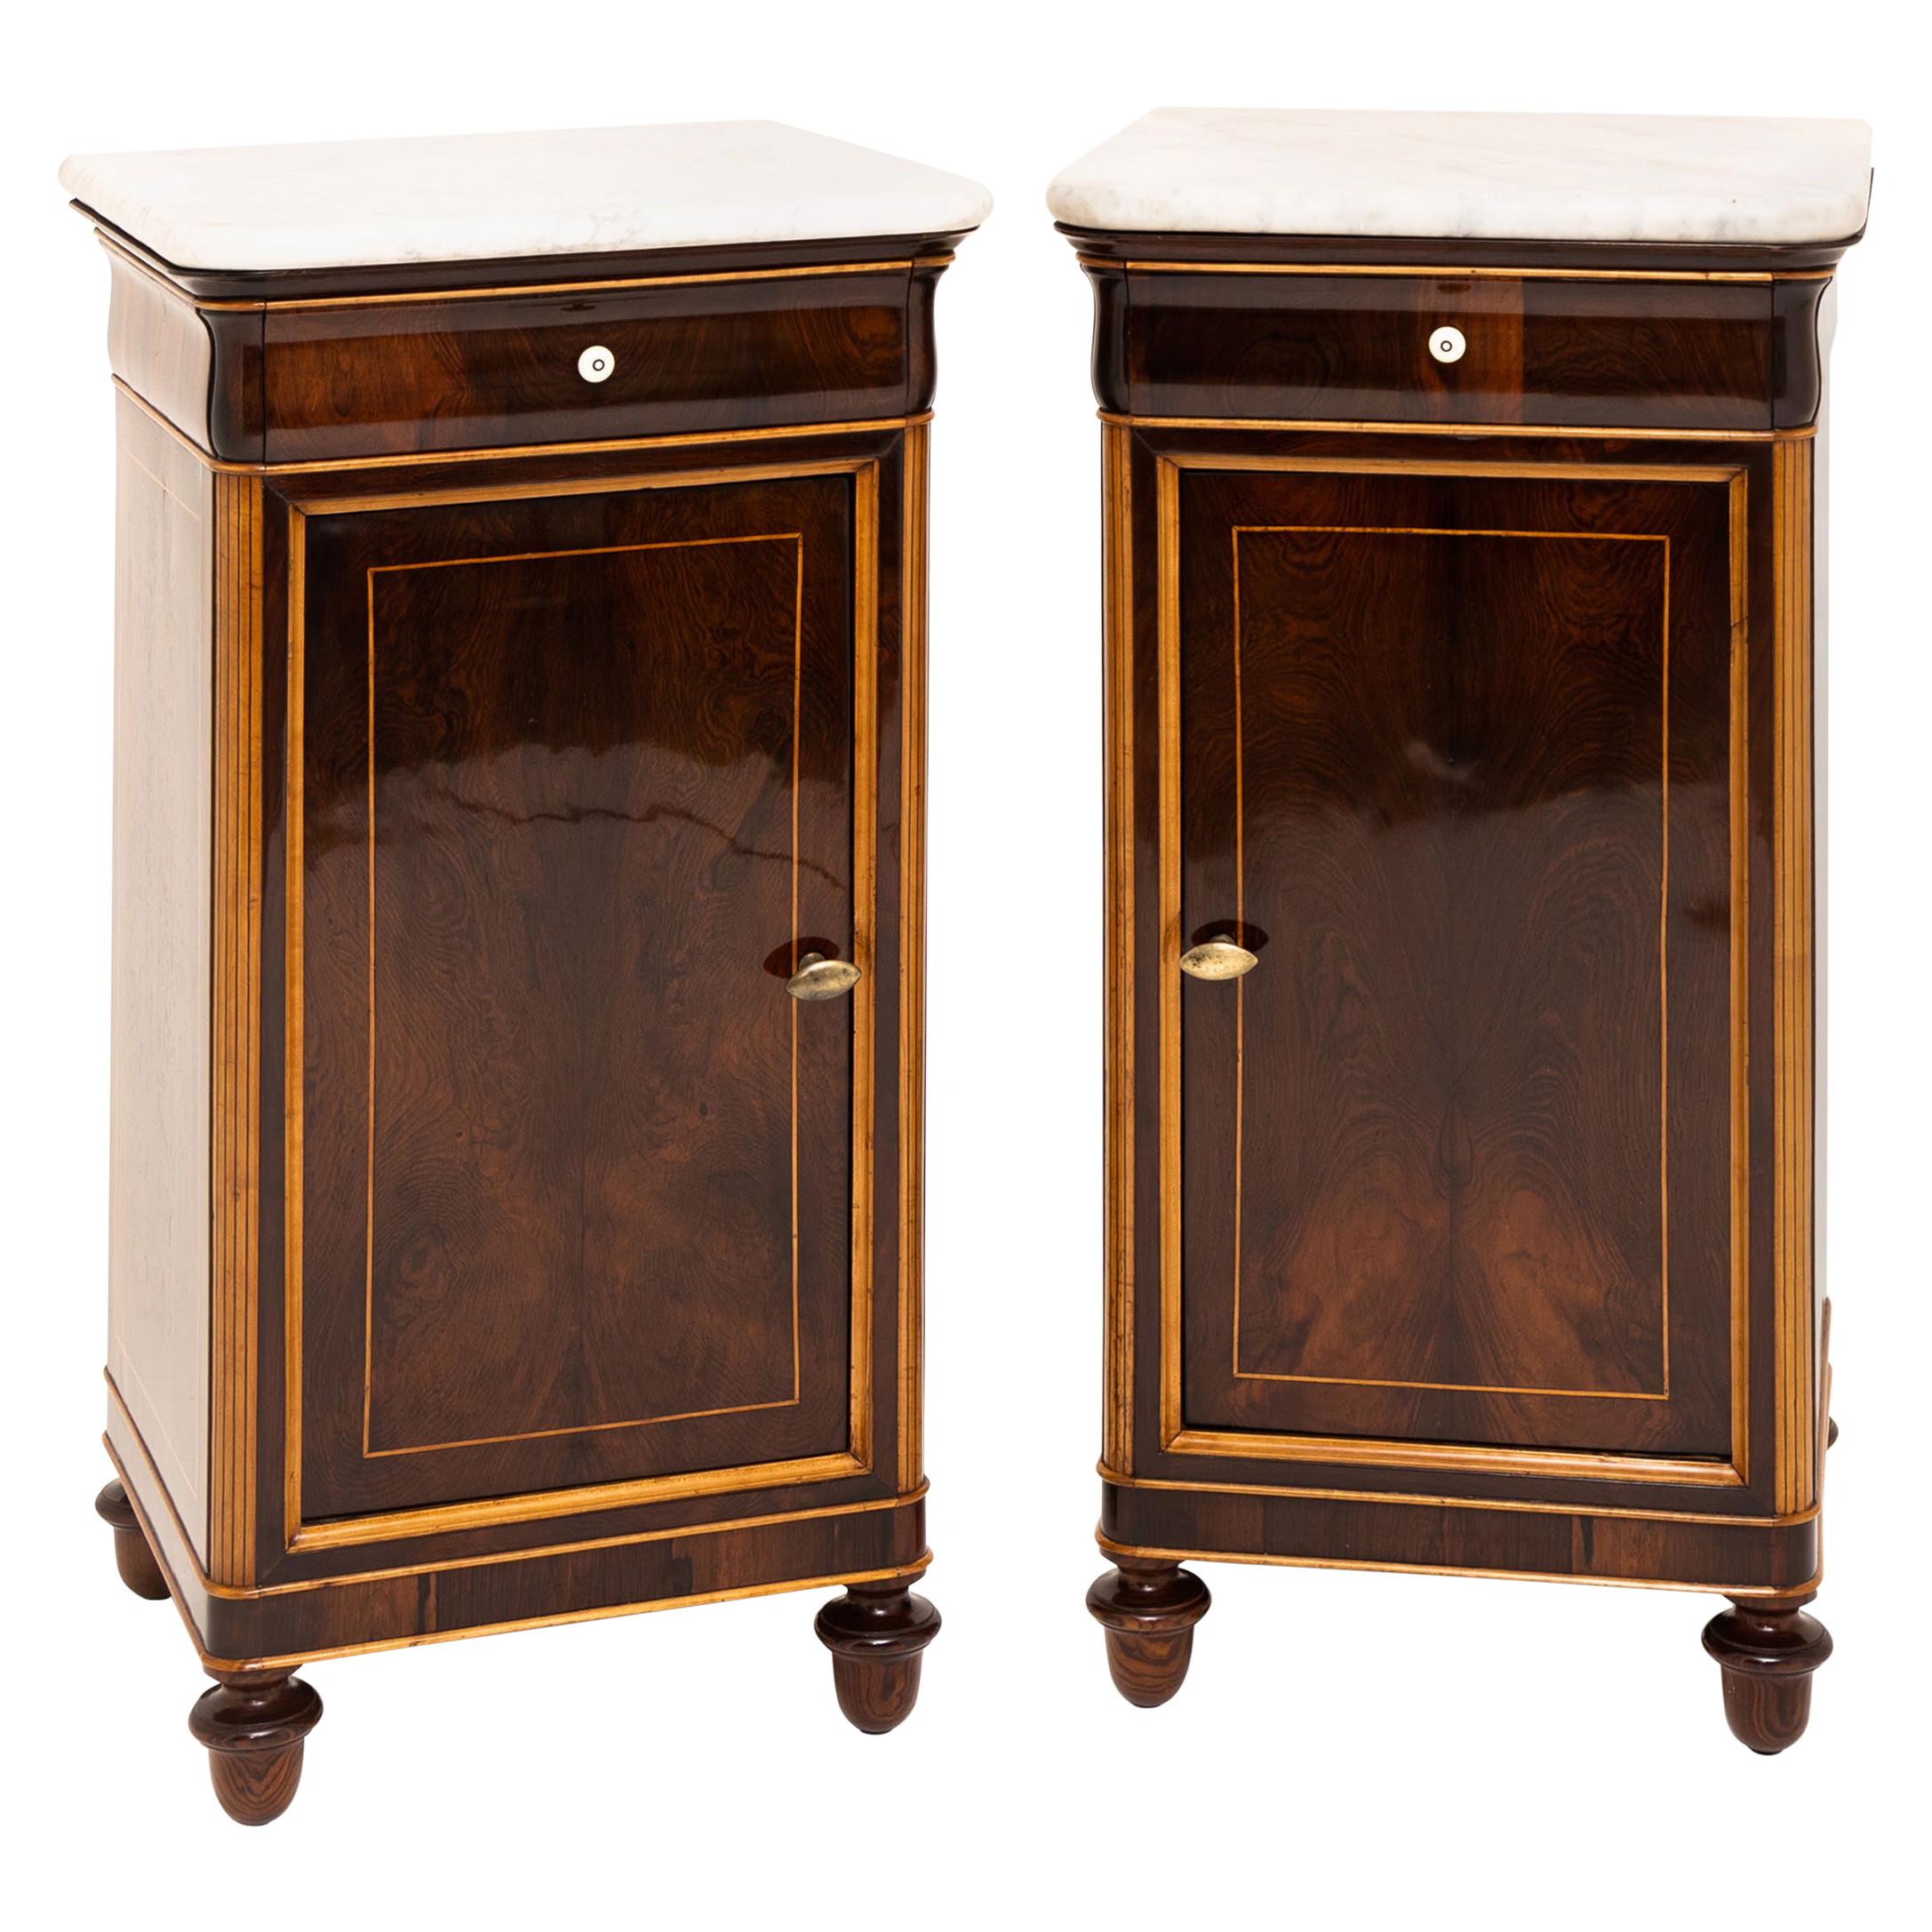 Pair of Mahogany and Marble Louis Philippe Nightstands, Mid-19th Century